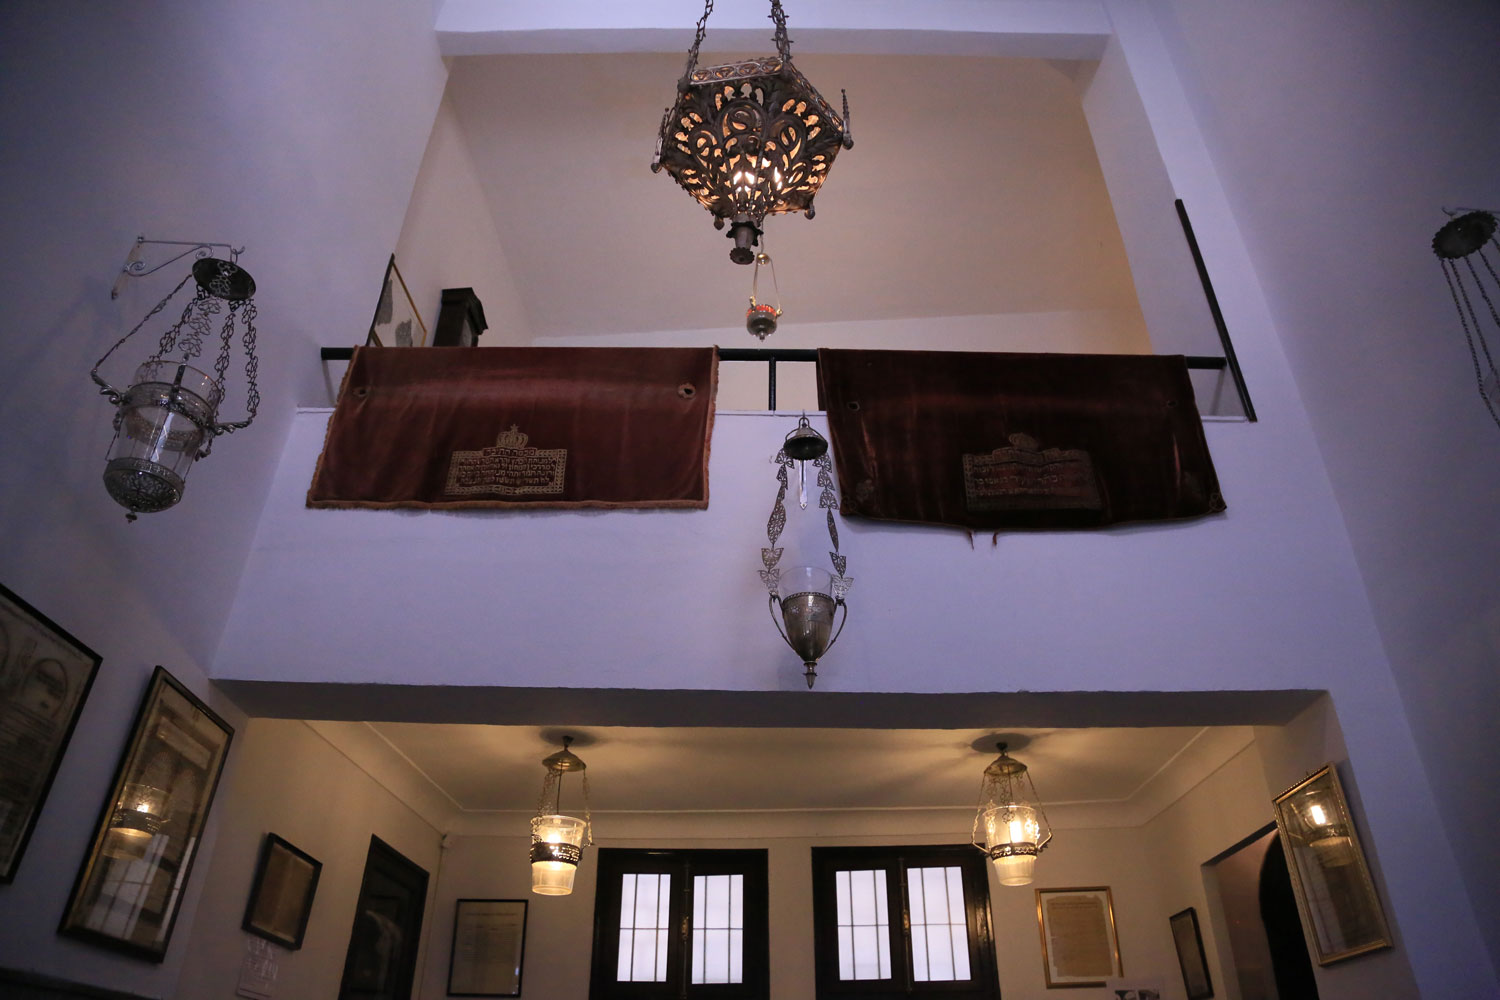 View toward the second floor balcony showing lamps